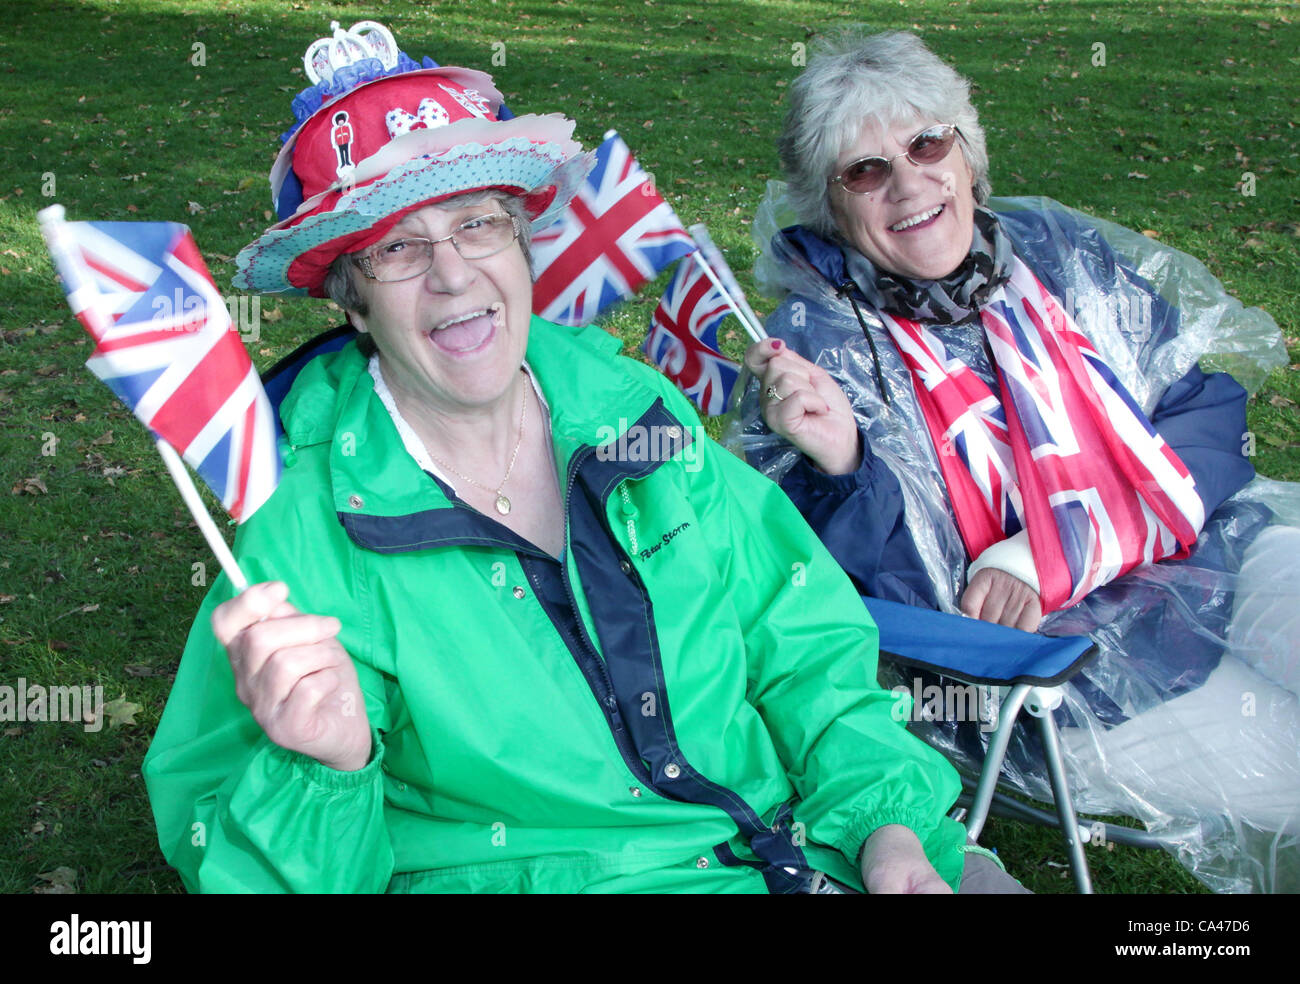 London, UK. June 4, 2012. Gill Watkins from Suffolk England and Liz Lyddon from Hampshire at St James's Park enjoying the music at the Concert to celebrate The Queen's Diamond Jubilee. 'They are looking forward to hearing Sir Cliff Richard sing'. Stock Photo